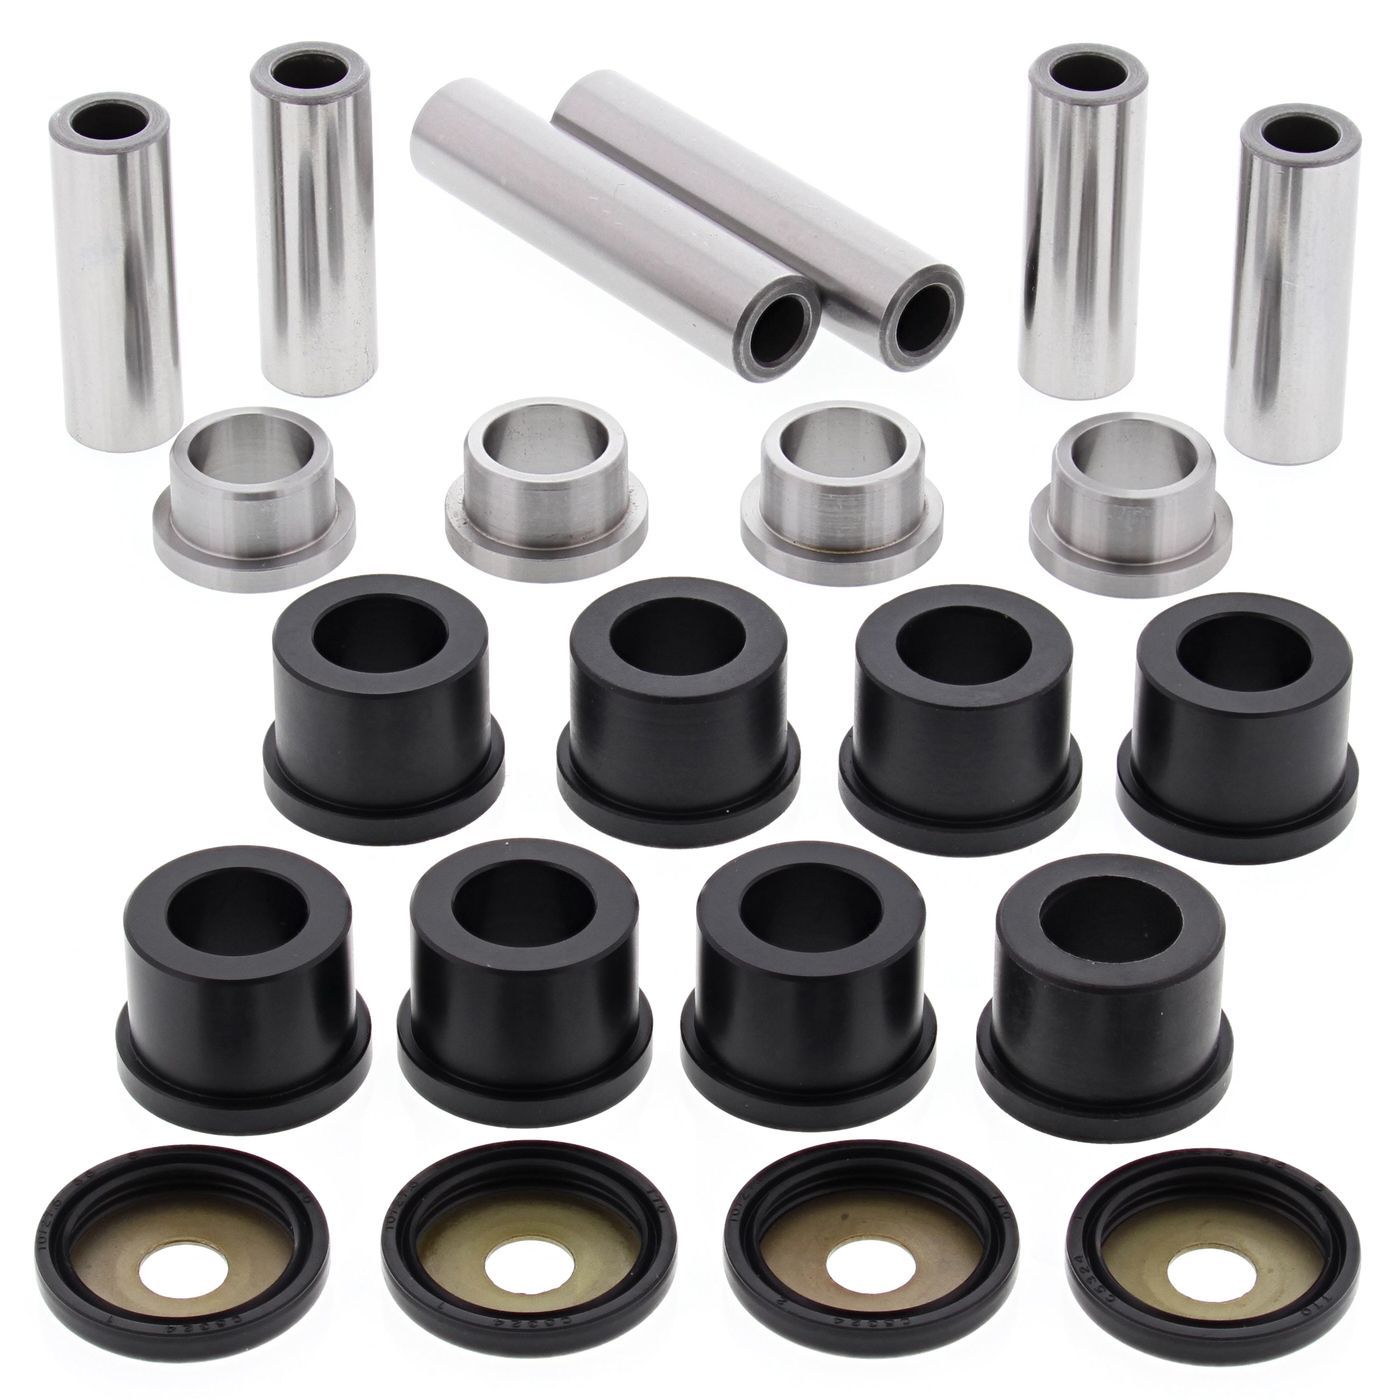 Wrp Rear Ind. Suspension Kits - WRP501034 image